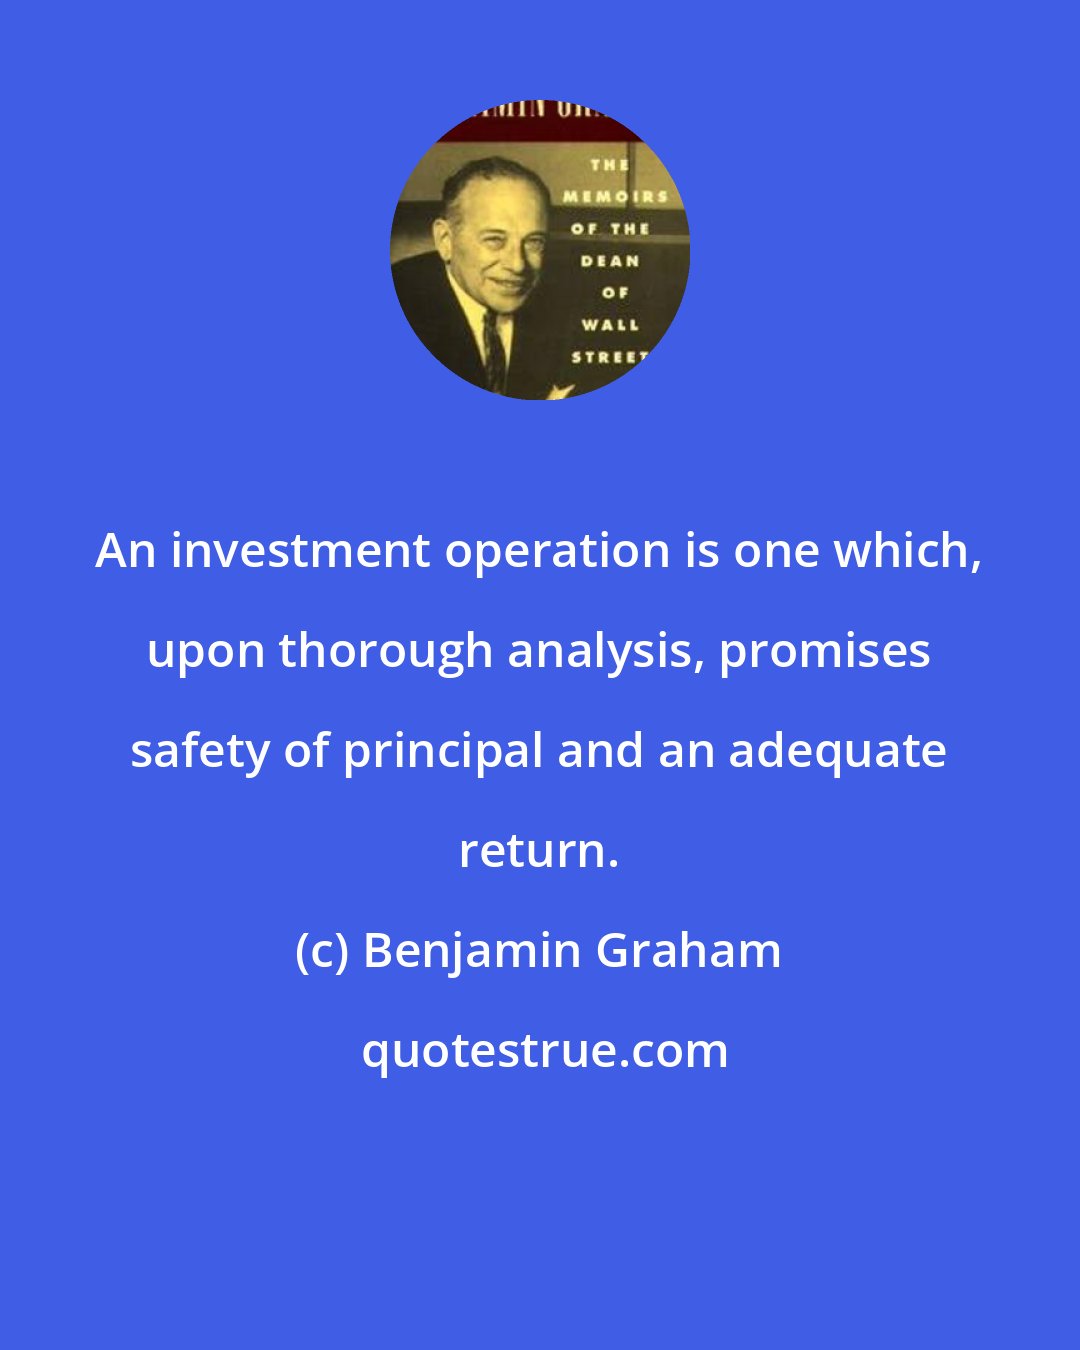 Benjamin Graham: An investment operation is one which, upon thorough analysis, promises safety of principal and an adequate return.